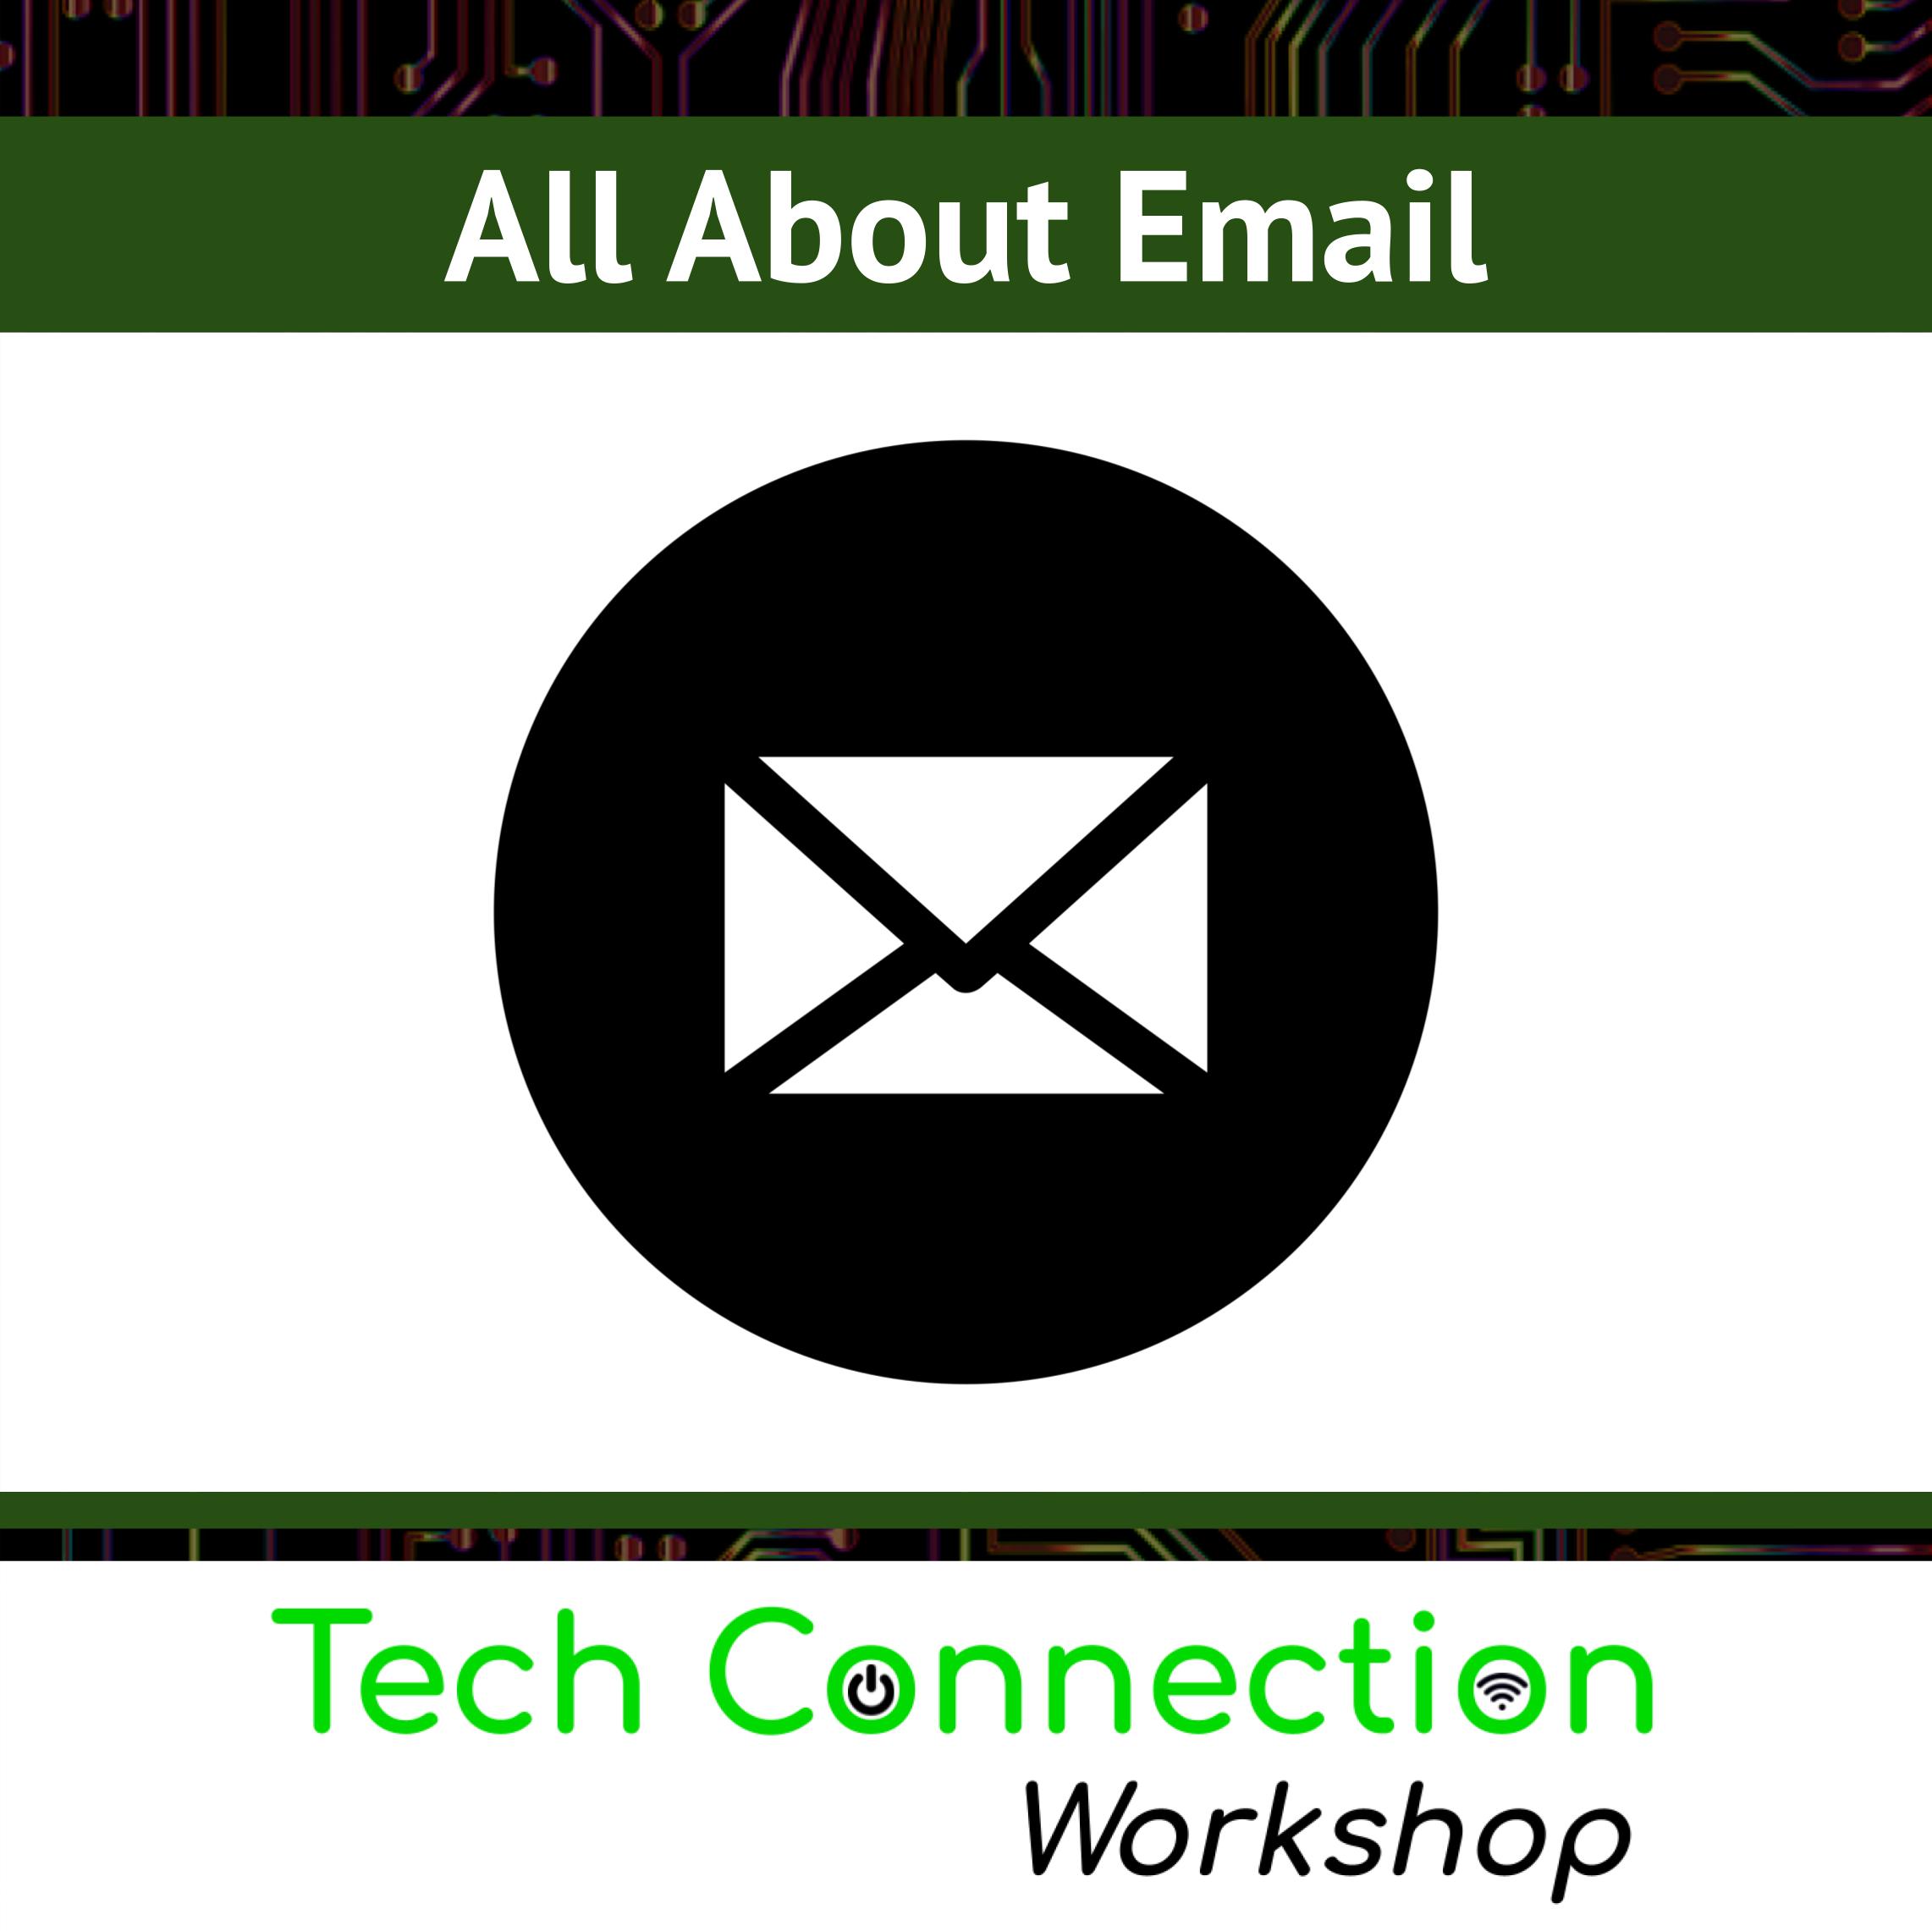 All About Email: Tech Connection Workshop